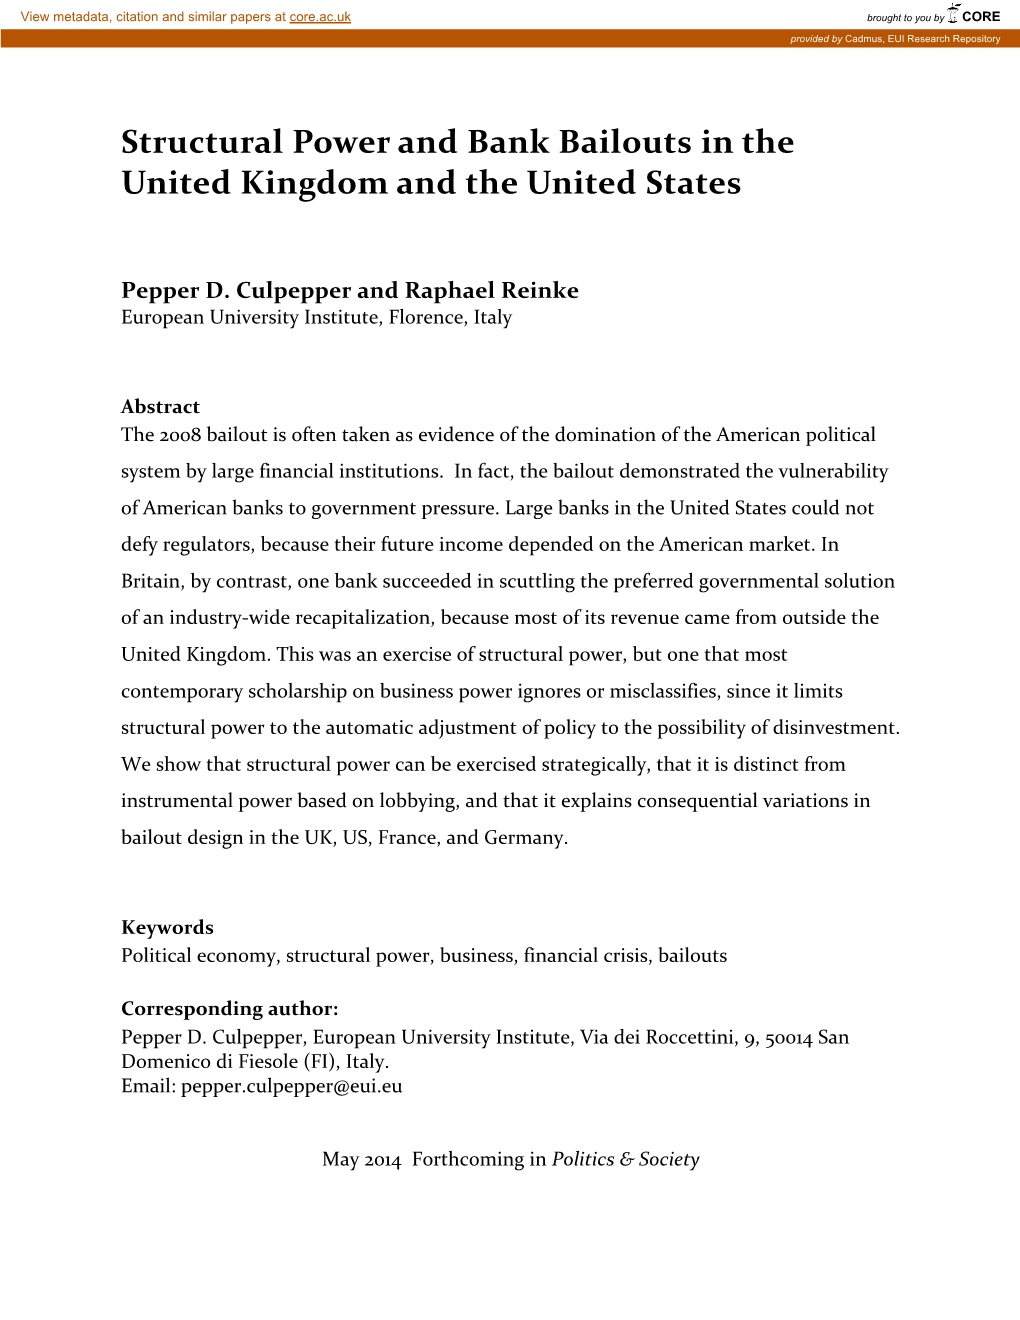 Structural Power and Bank Bailouts in the United Kingdom and the United States